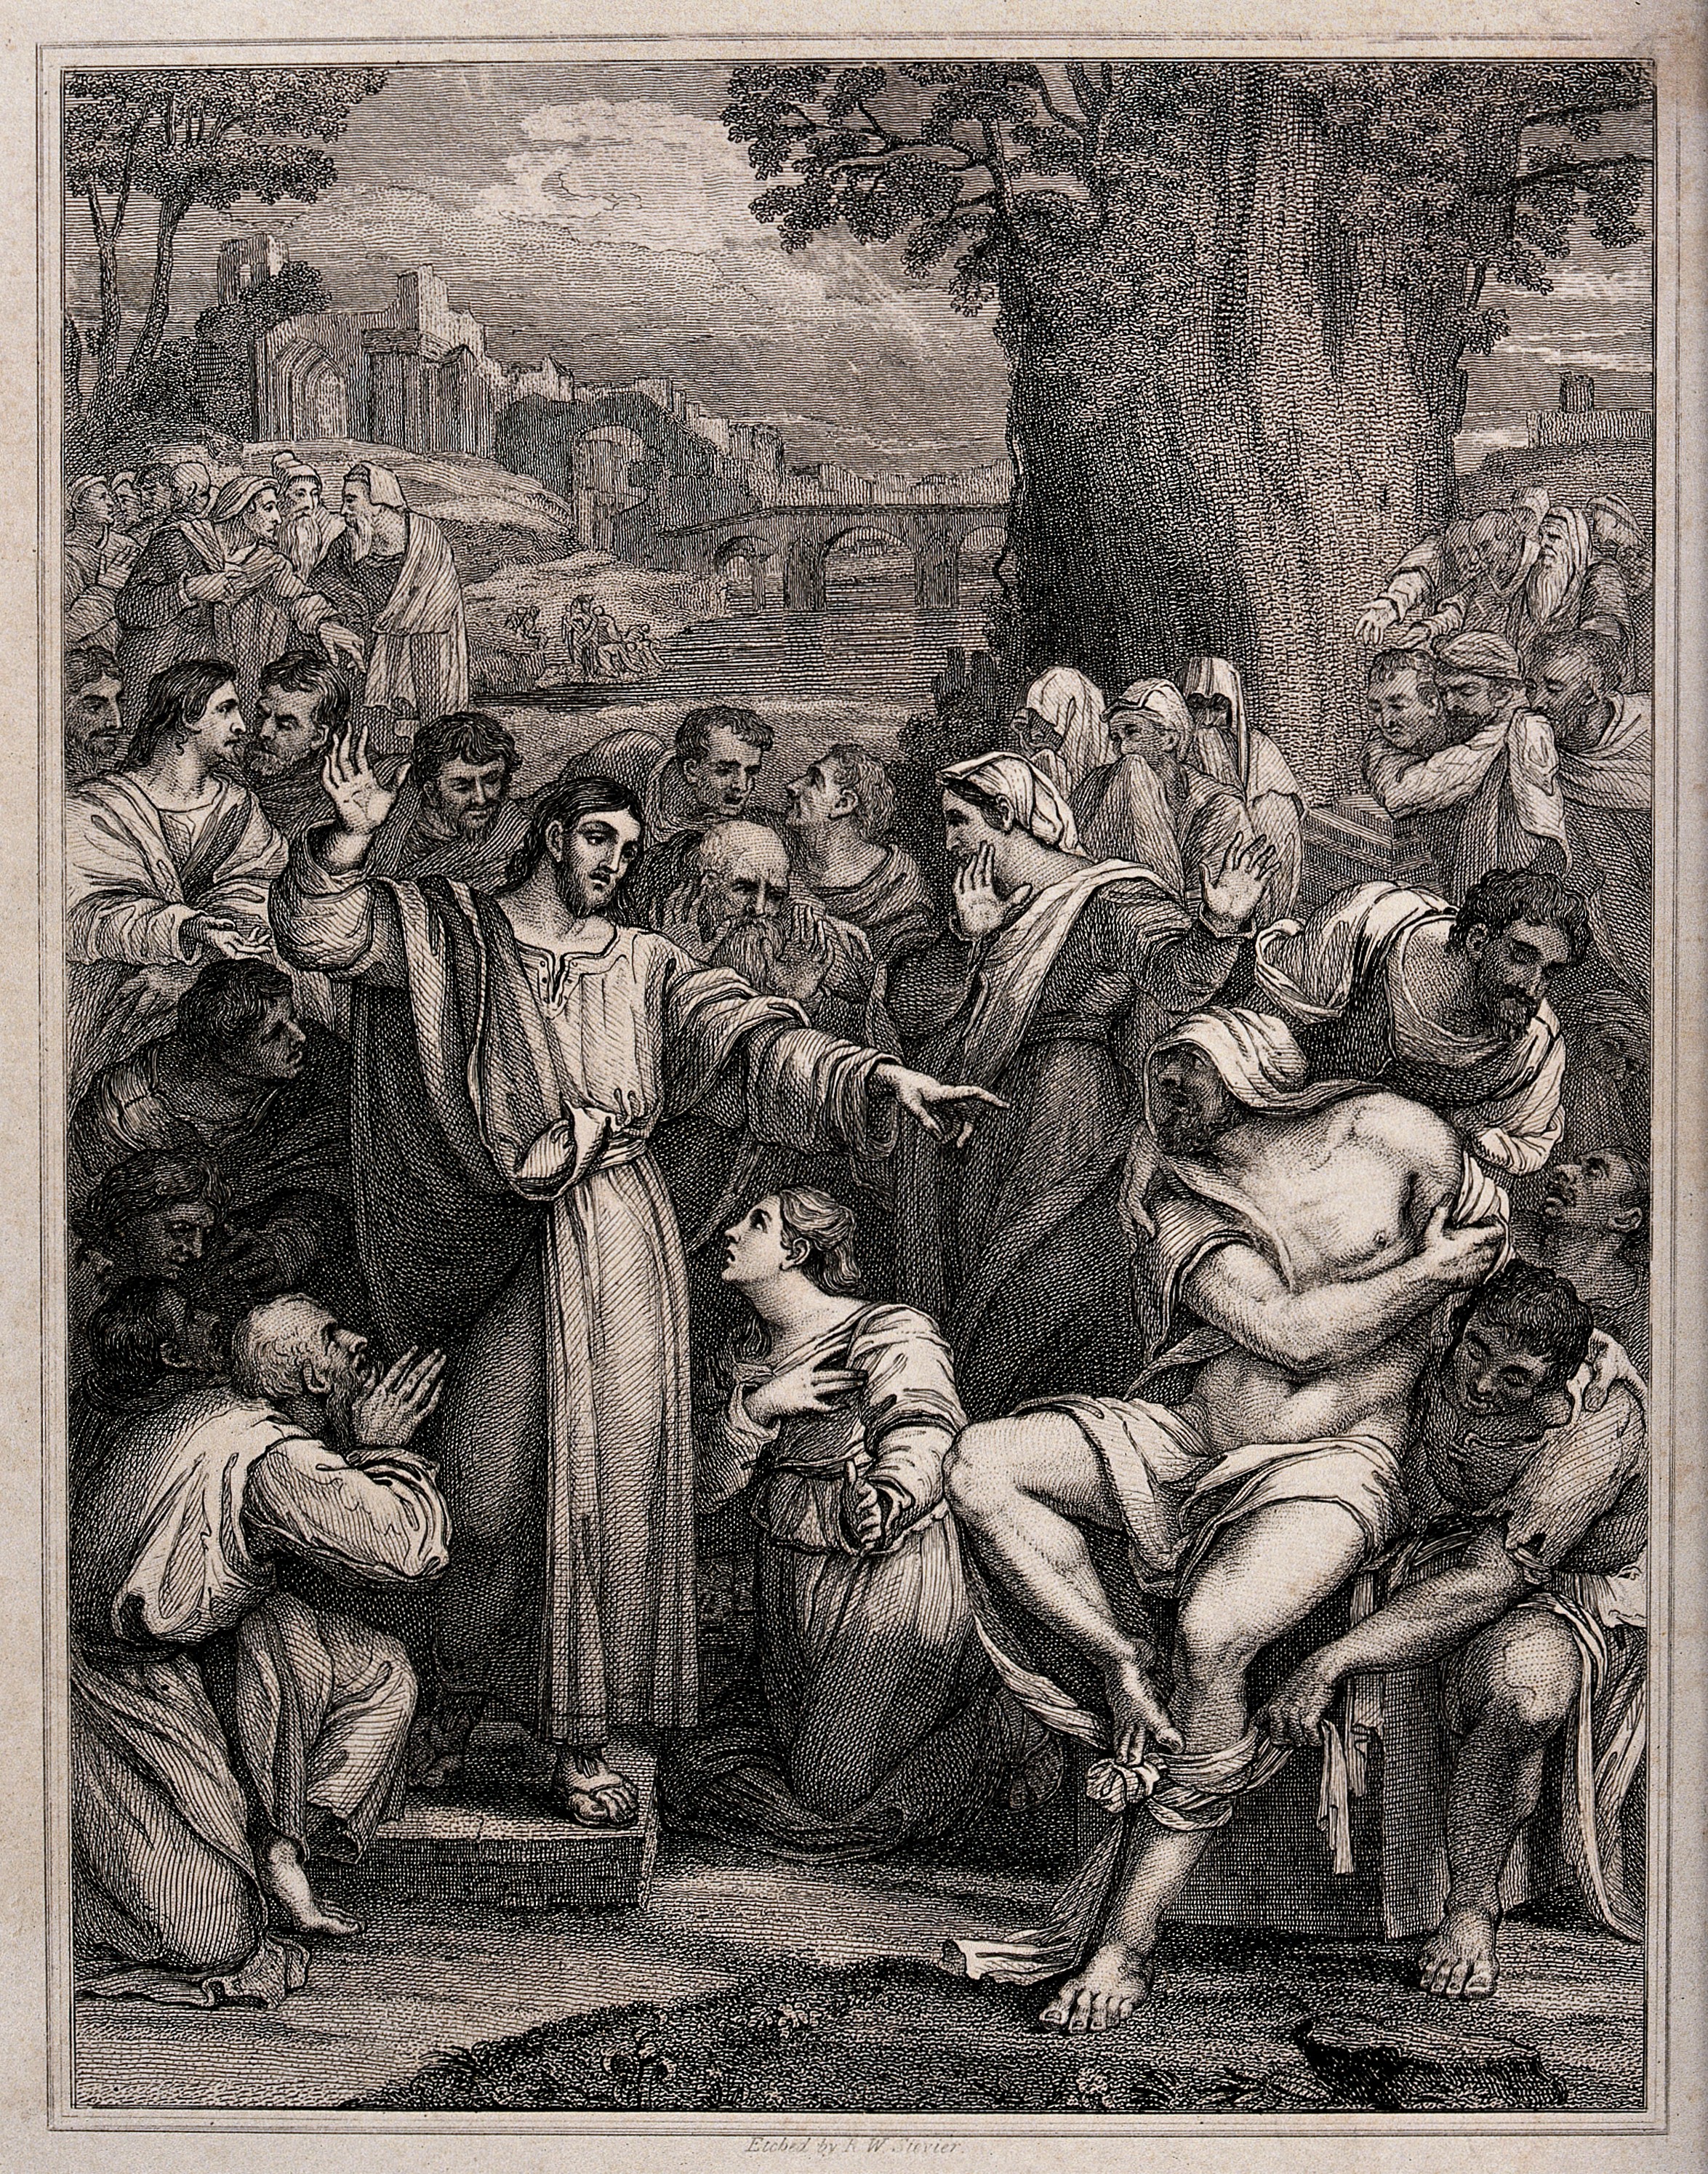 Christ raises Lazarus from his tomb. Etching by R.W. Sievier Wellcome V0034882